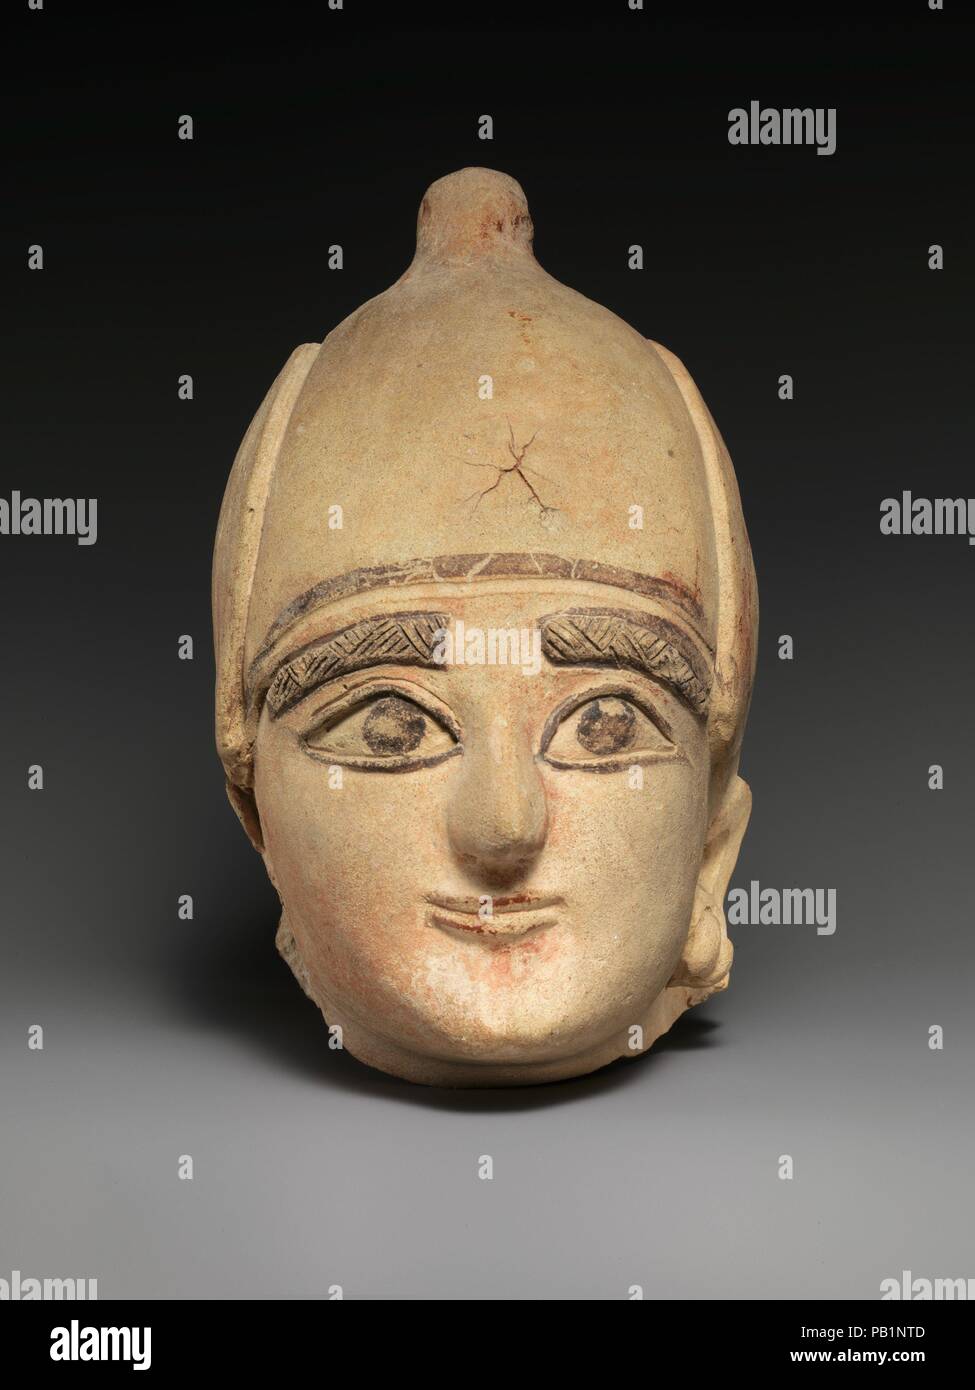 Terracotta head of a man. Culture: Cypriot. Dimensions: H. 8 3/4 in. (22.2 cm). Date: ca. 600 B.C..  The manufacture of large scale hollow terracotta sculpture on Cyprus began in the mid-seventh century B.C.  This is one of the finest examples of the 'Neo-Cypriot' style, characterized by fine features, large ridged eyes, feathered eyebrows, and a lot of color. Museum: Metropolitan Museum of Art, New York, USA. Stock Photo